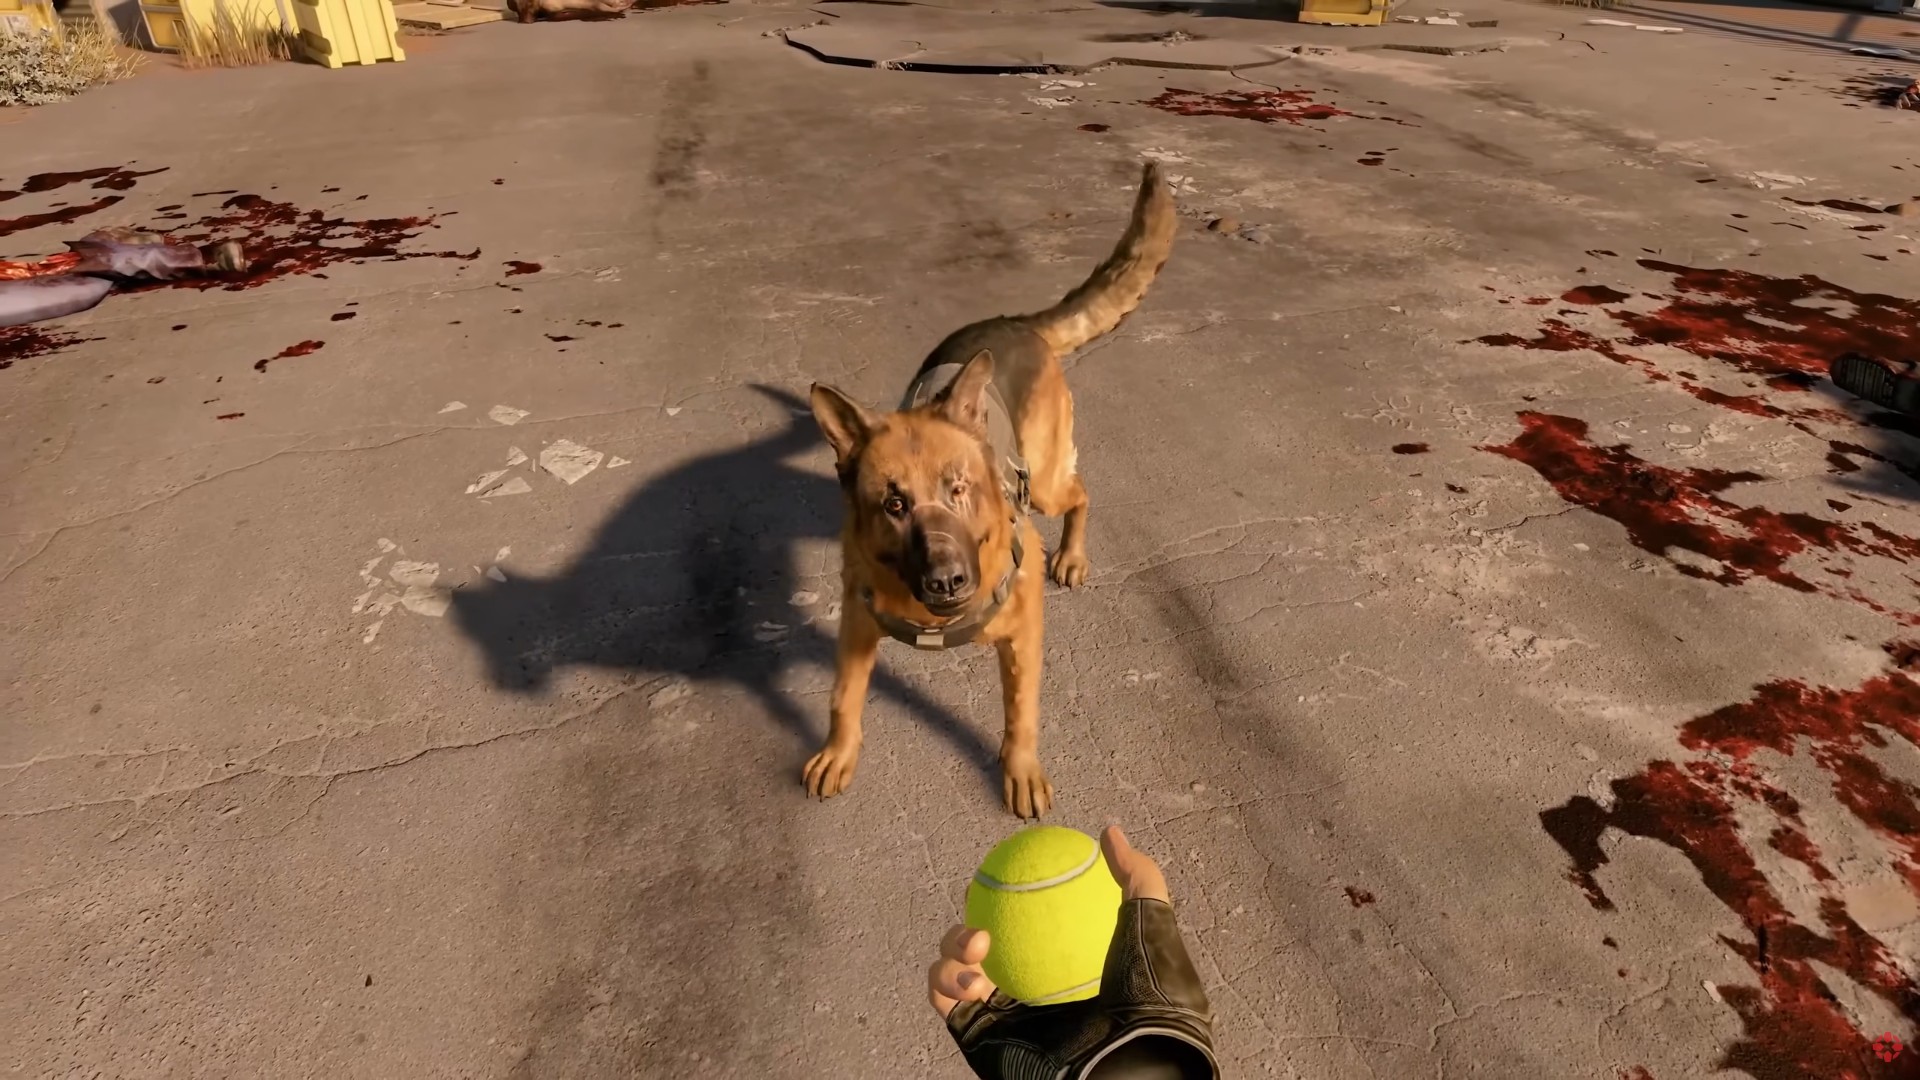 First-person perspective of the protagonist throwing a ball for their dog.